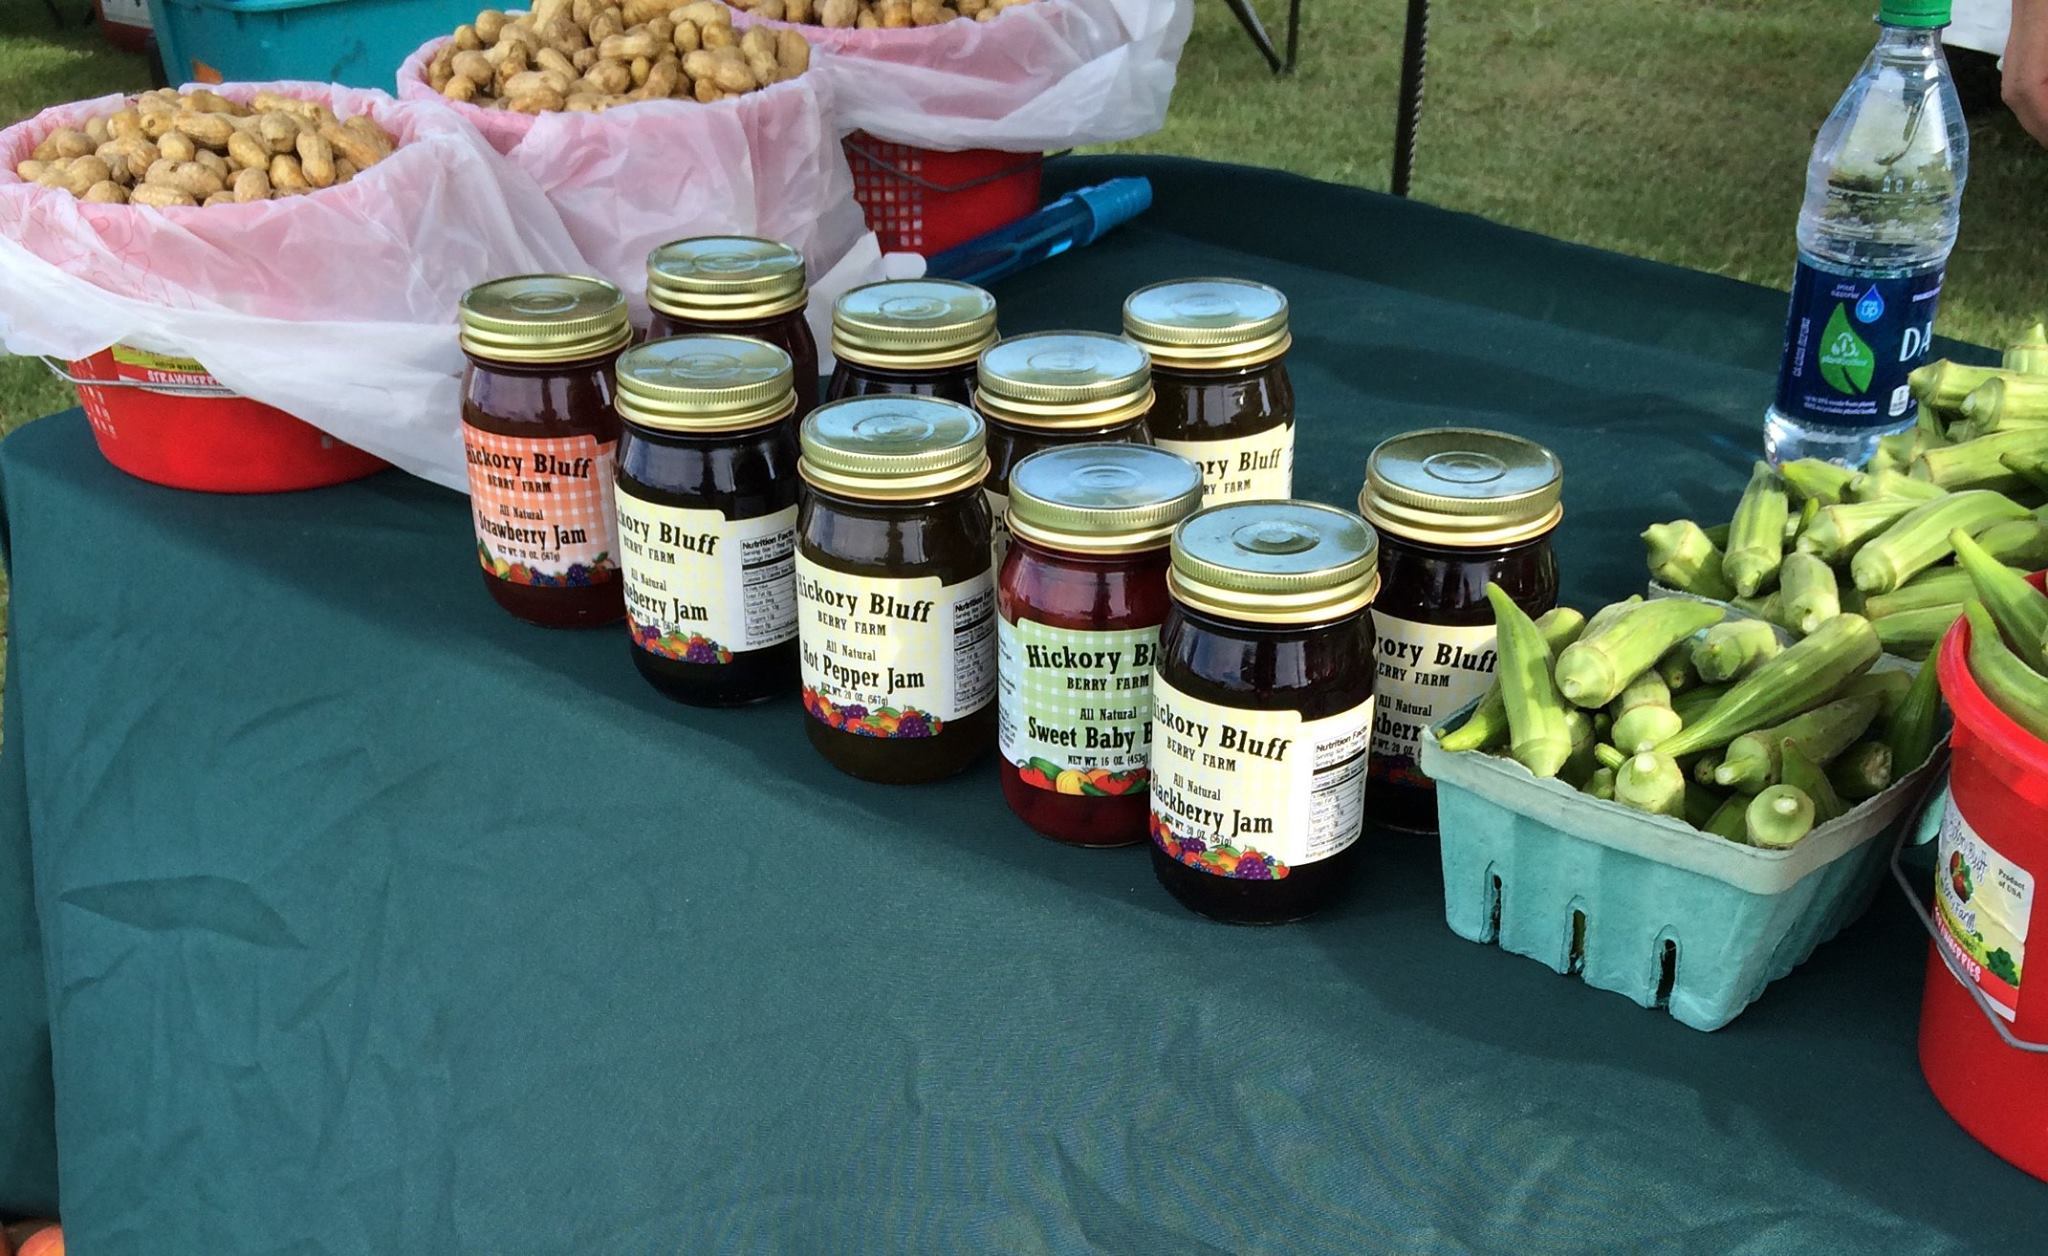 Pictured: Just some of the locally-made products you can buy at the Farmers Market.